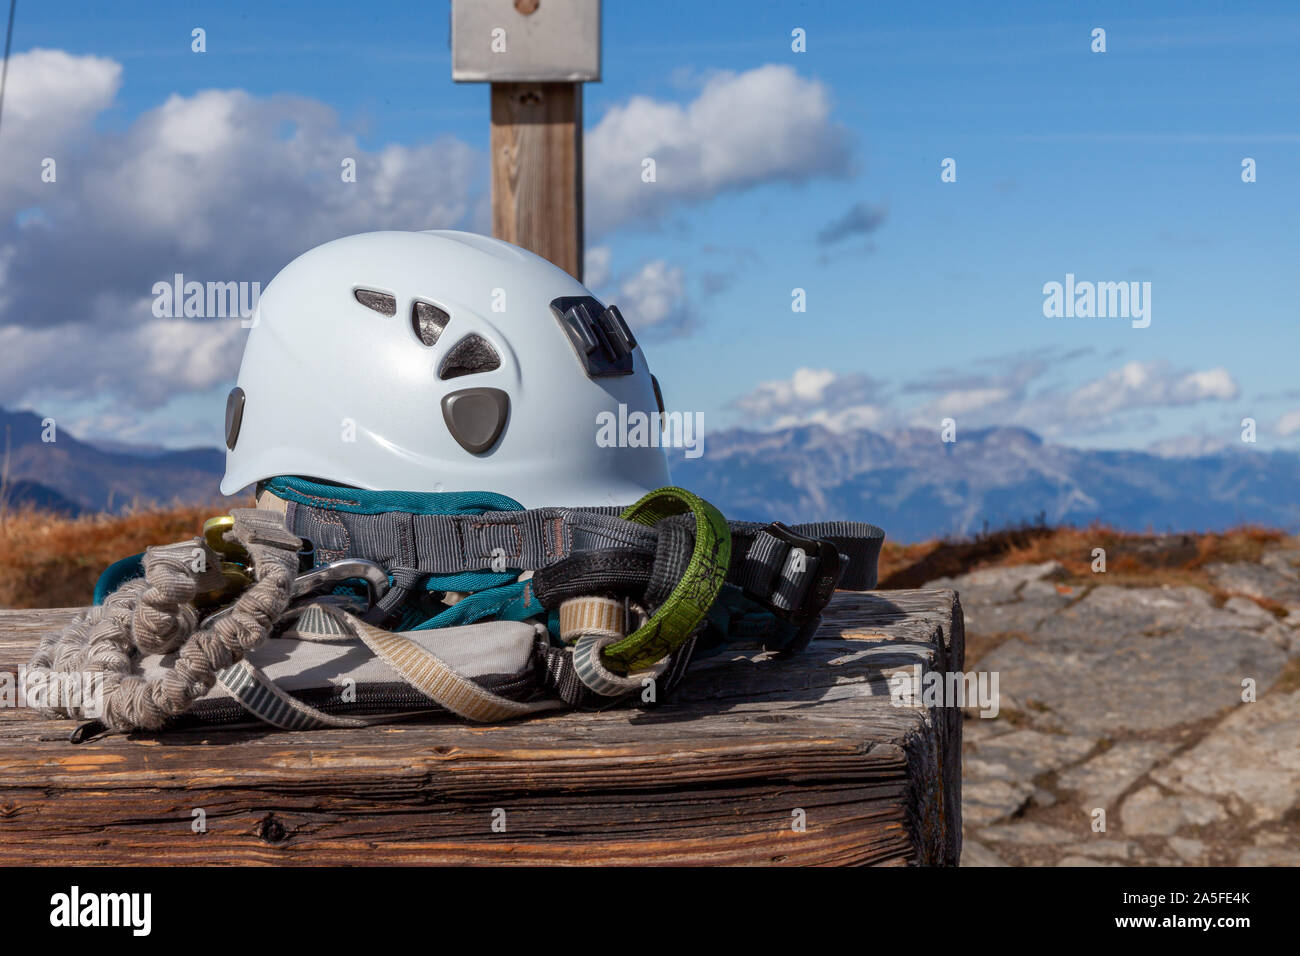 Climbing safety gear lying on a table on a mountain summit. A helmet and climbing harness are shown in front of a summit cross. In the background a mo Stock Photo